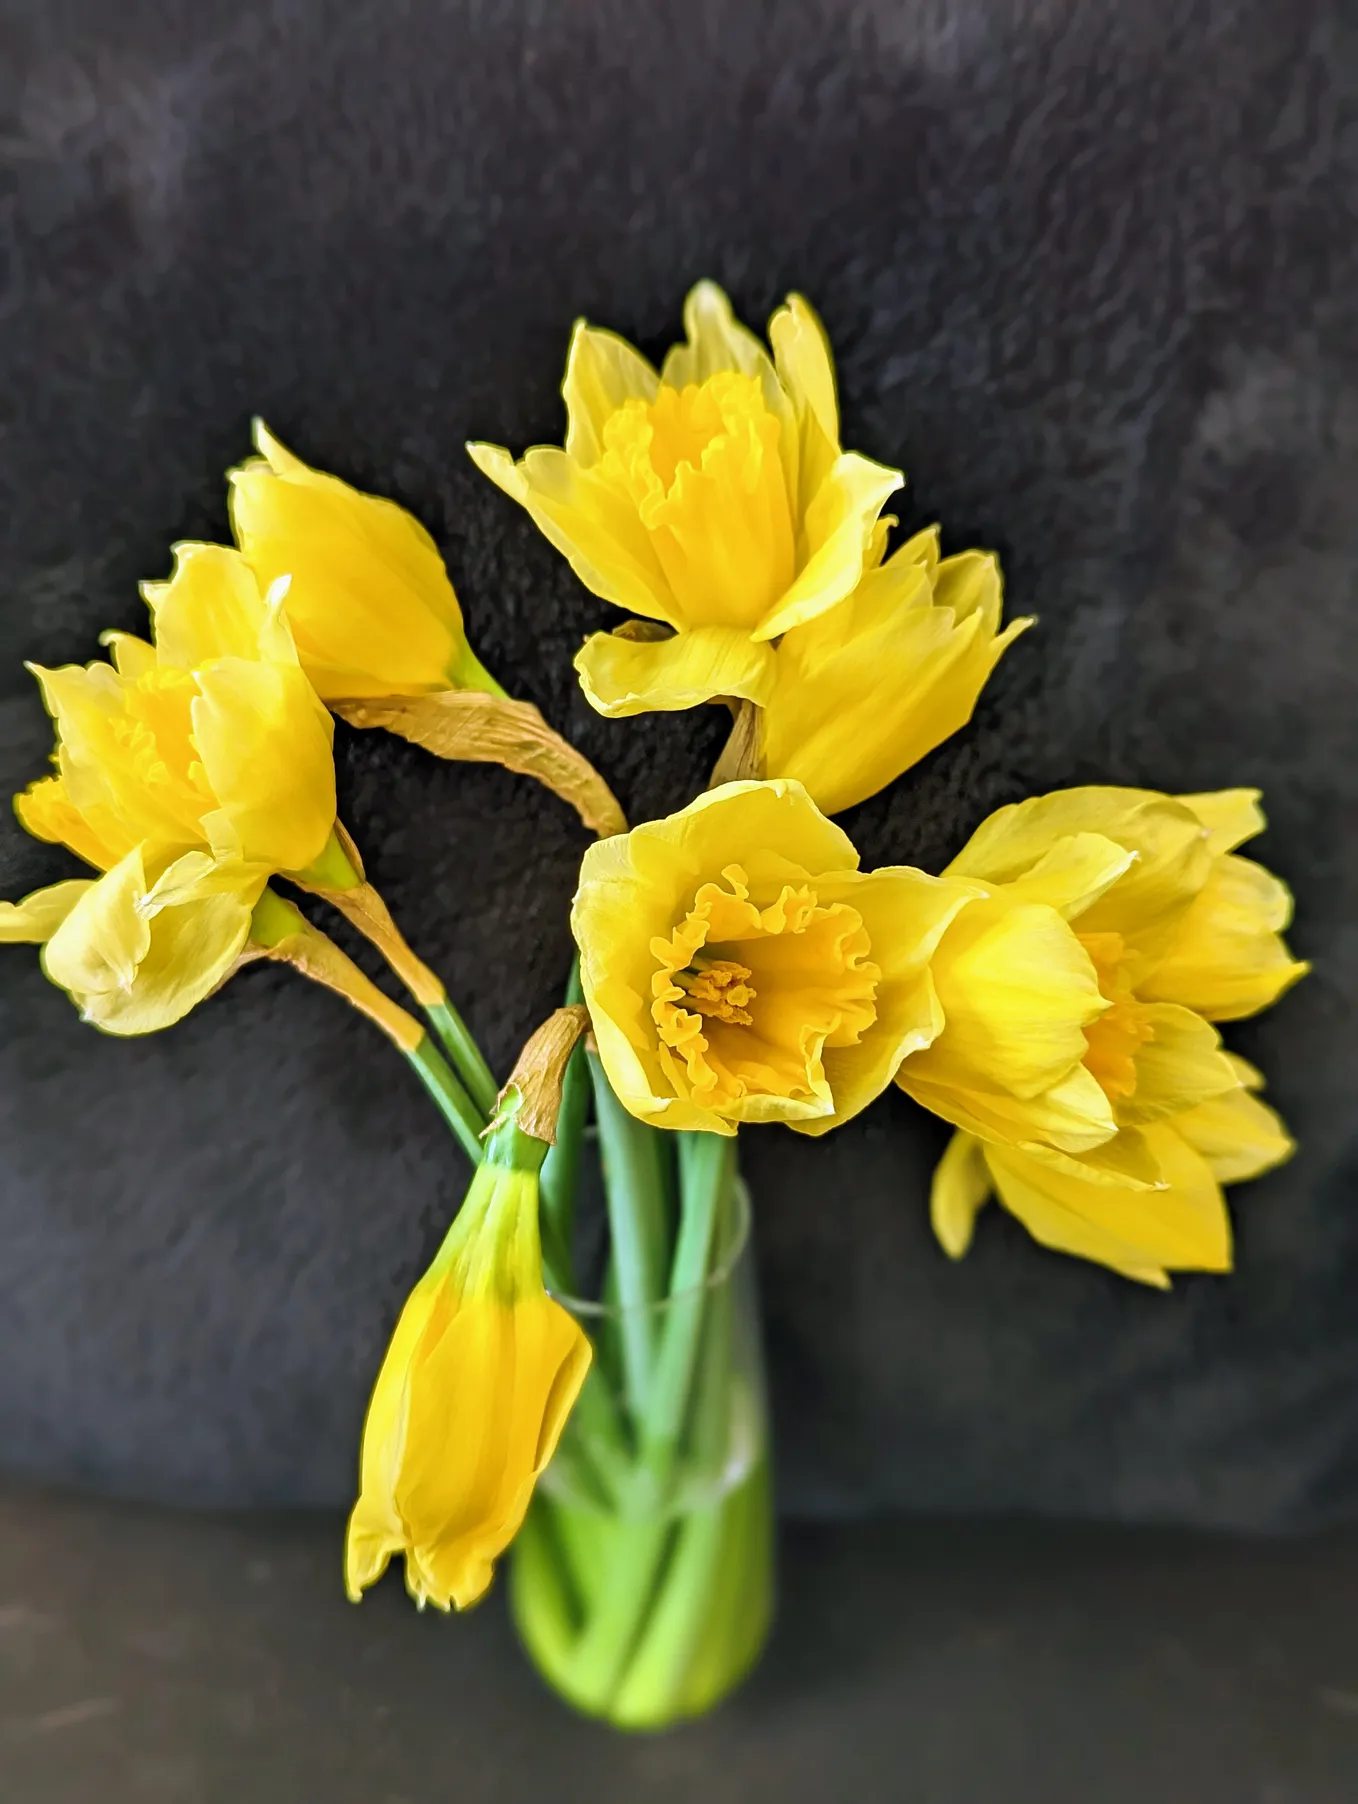 The Color of Daffodils